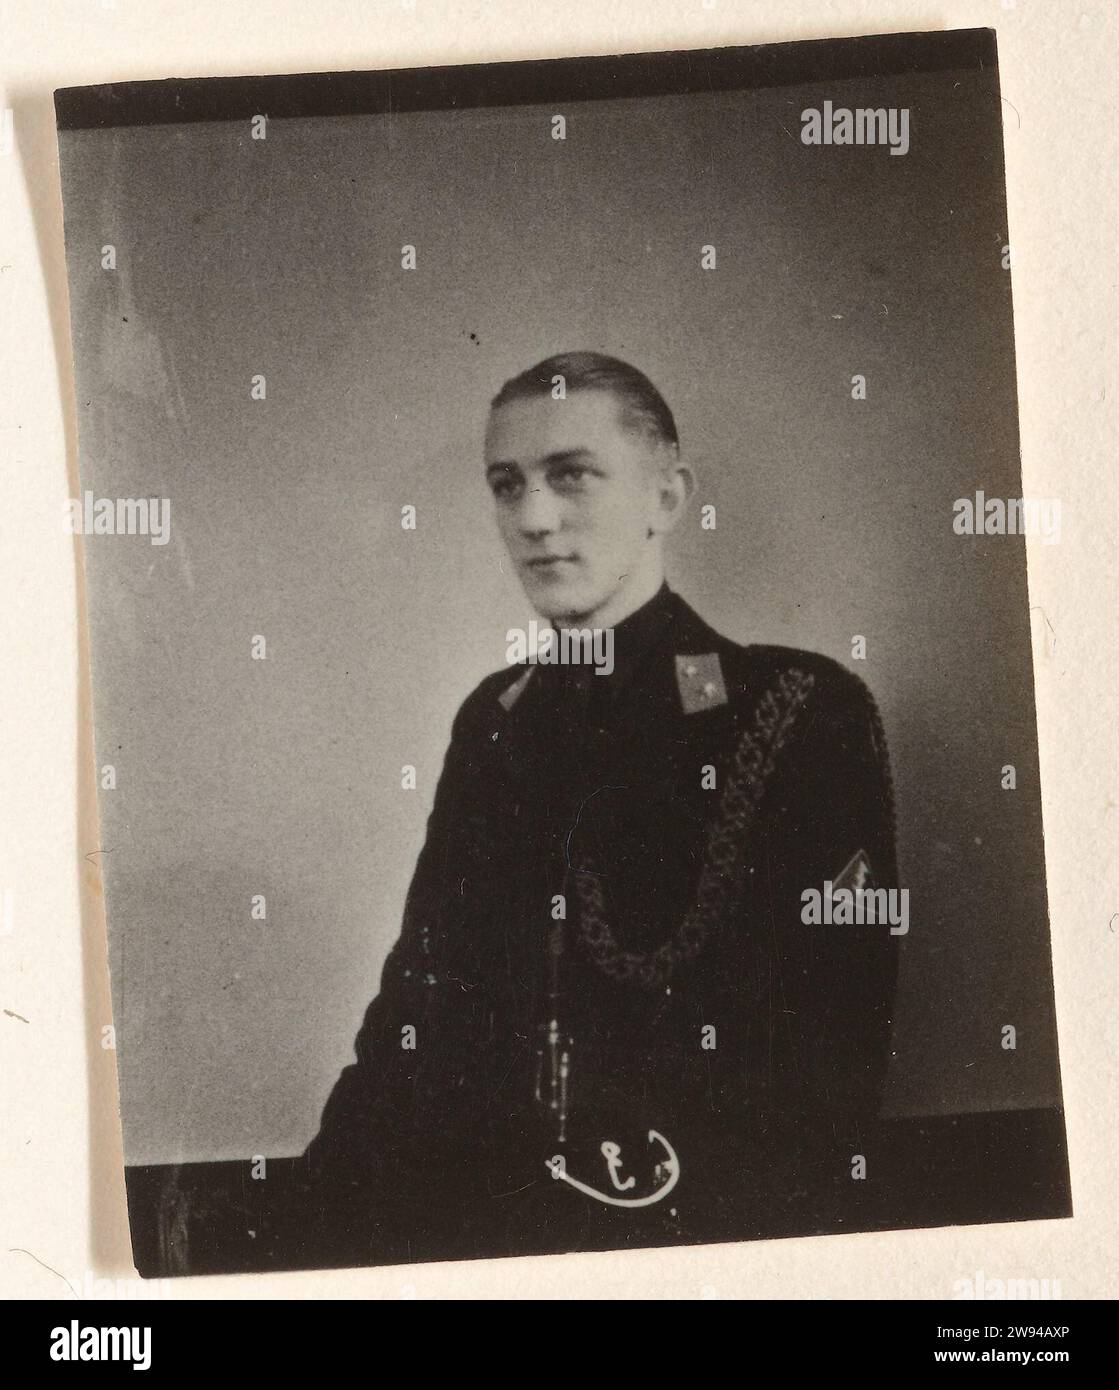 Portrait of a member of De Wa, 1940 - 1944 photograph Portrait of a member of the WA. On his collar a distinctive with two stars: companion, a low rank. On his right sleeve, the Wolfsangel (wa symbol) and a nest around his chest: adjutant. Barefoot. Netherlands photographic support  anonymous historical person portrayed Netherlands Stock Photo